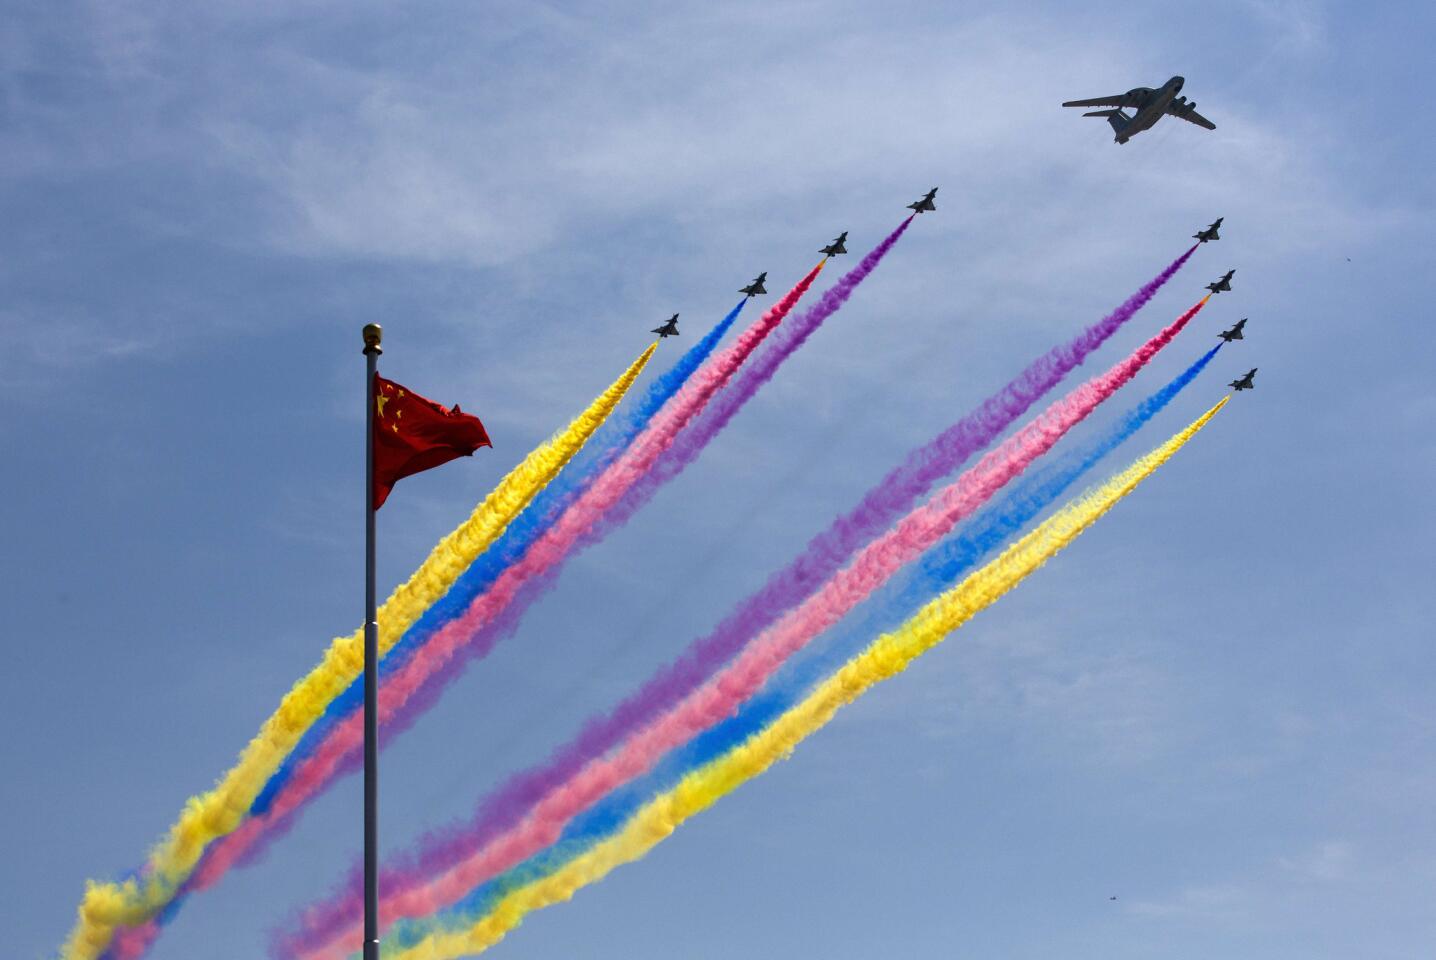 A KJ-2000 airborne early warning and control system leads J-10 fighter jets past a national flag during a military parade at Tiananmen Square in Beijing on Sept. 3, 2015, to mark the 70th anniversary of victory over Japan and the end of World War II.